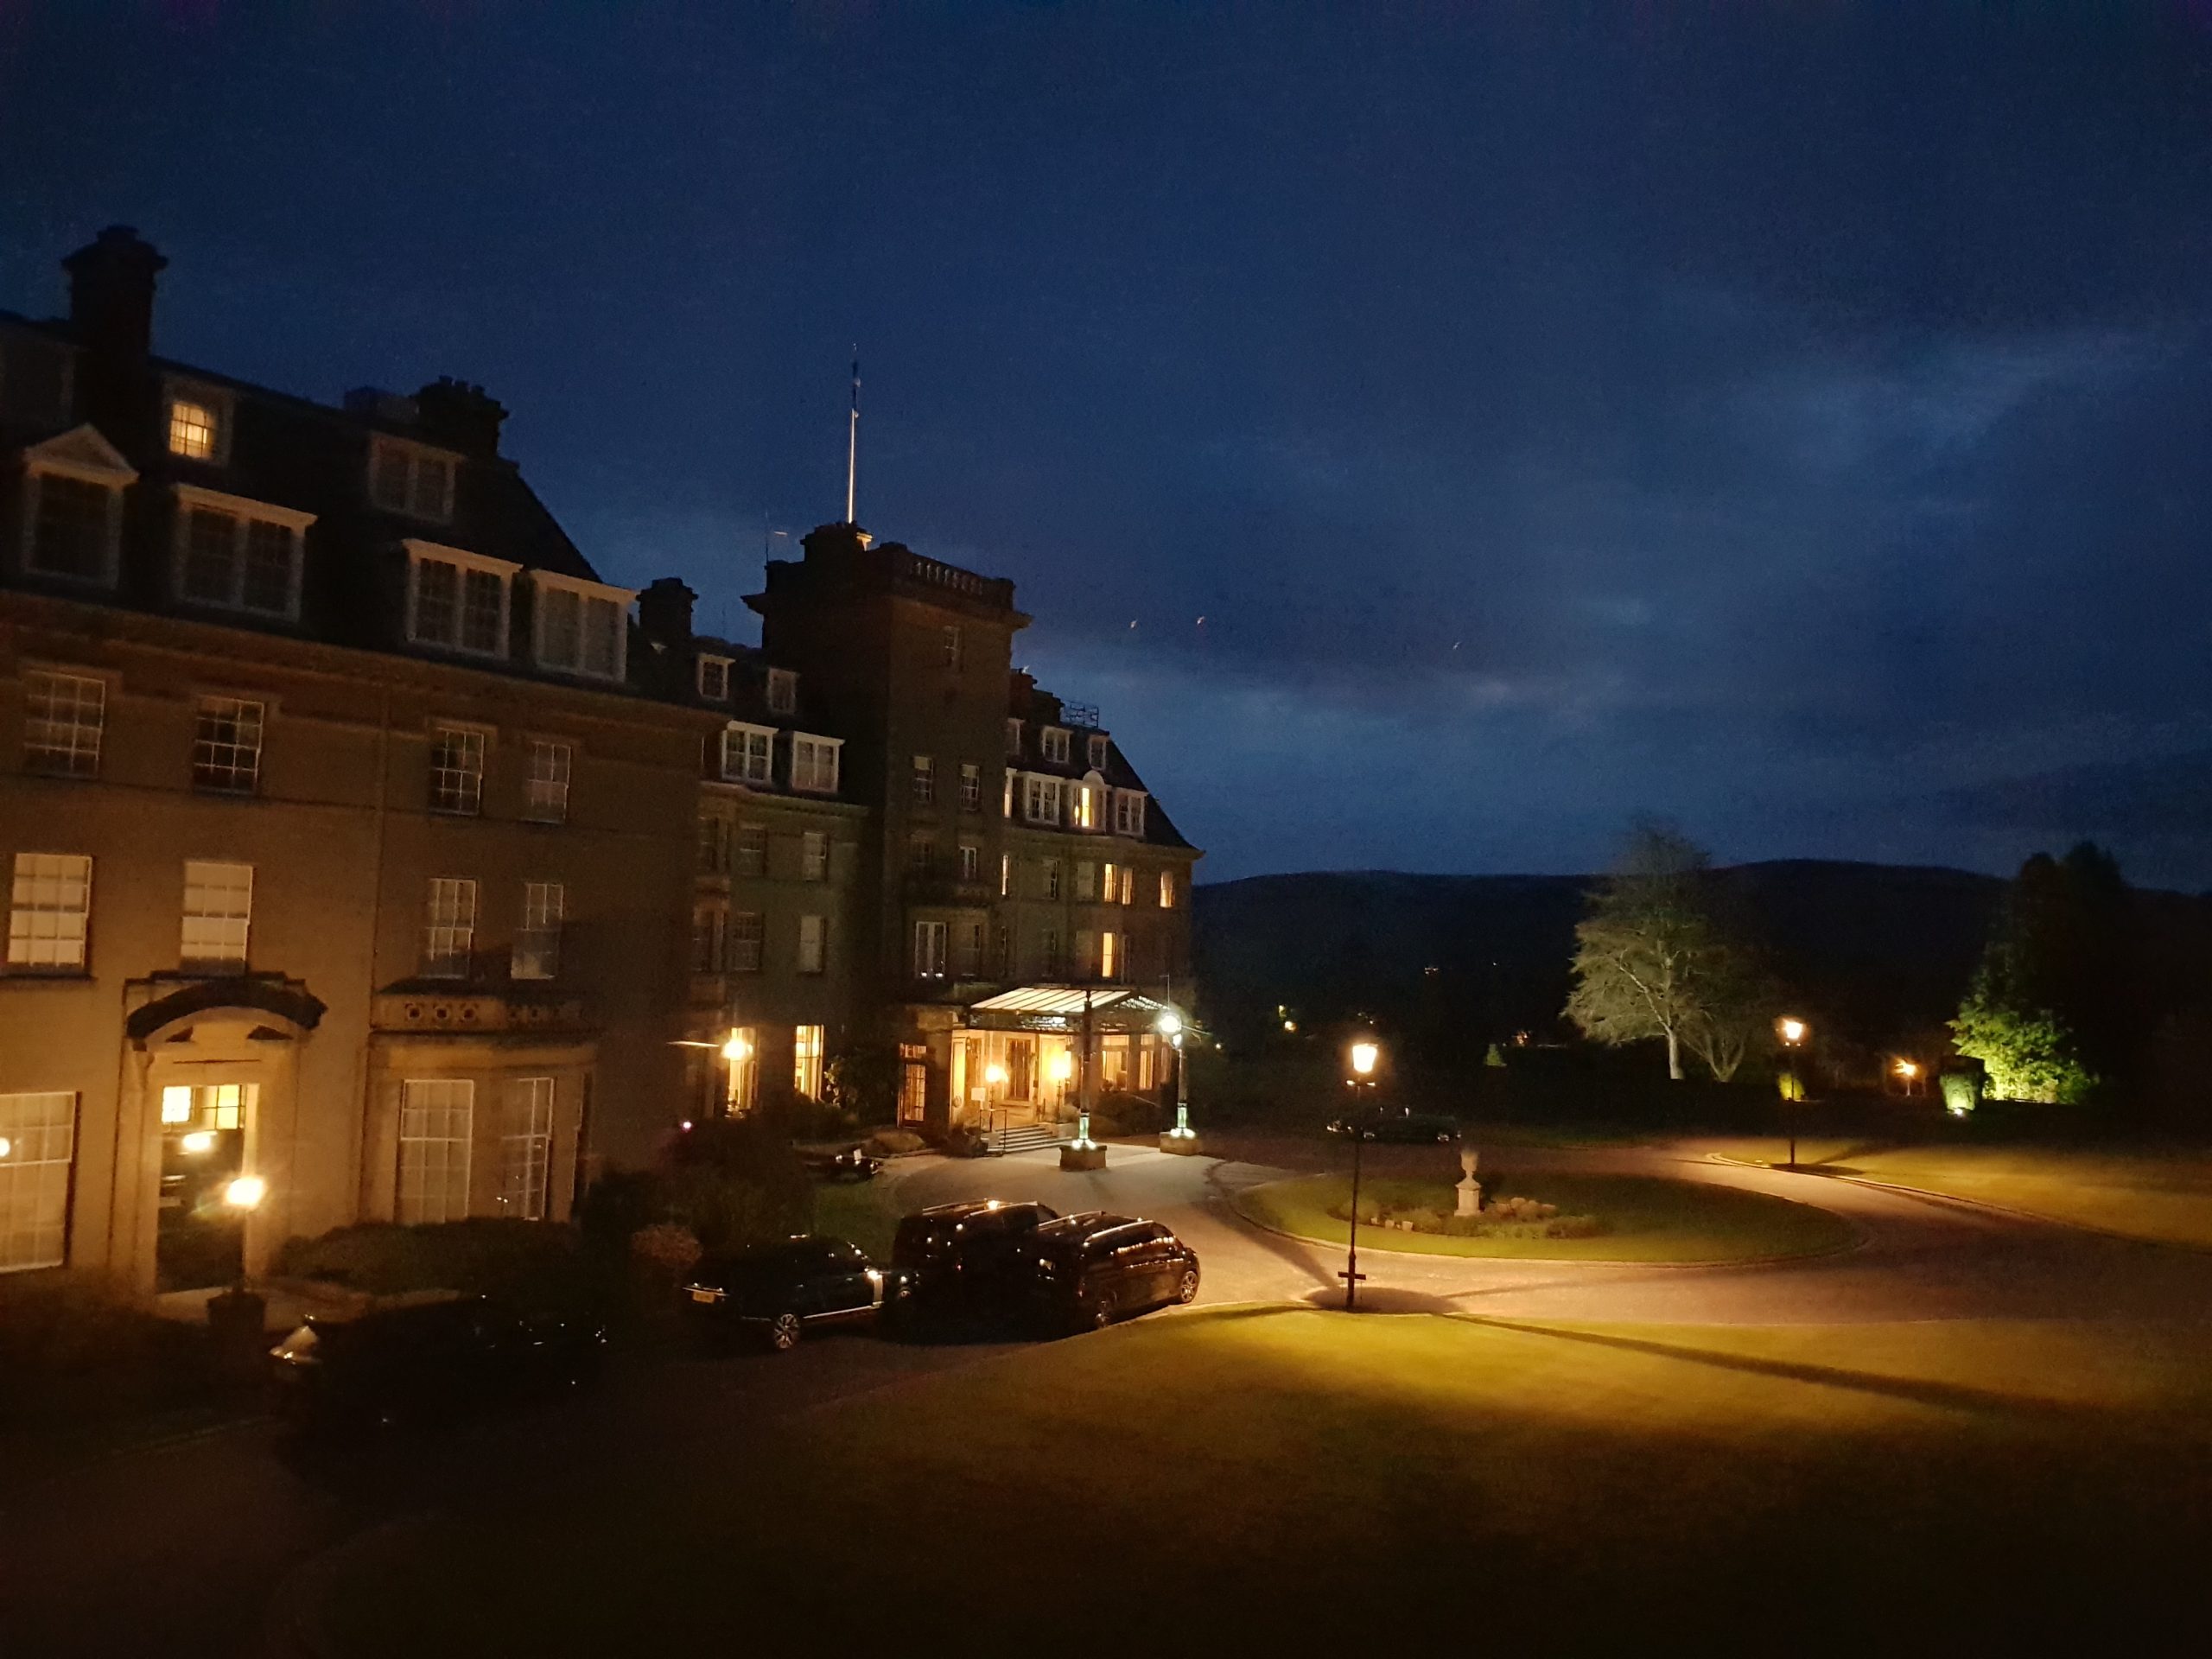 View of Gleneagles at night